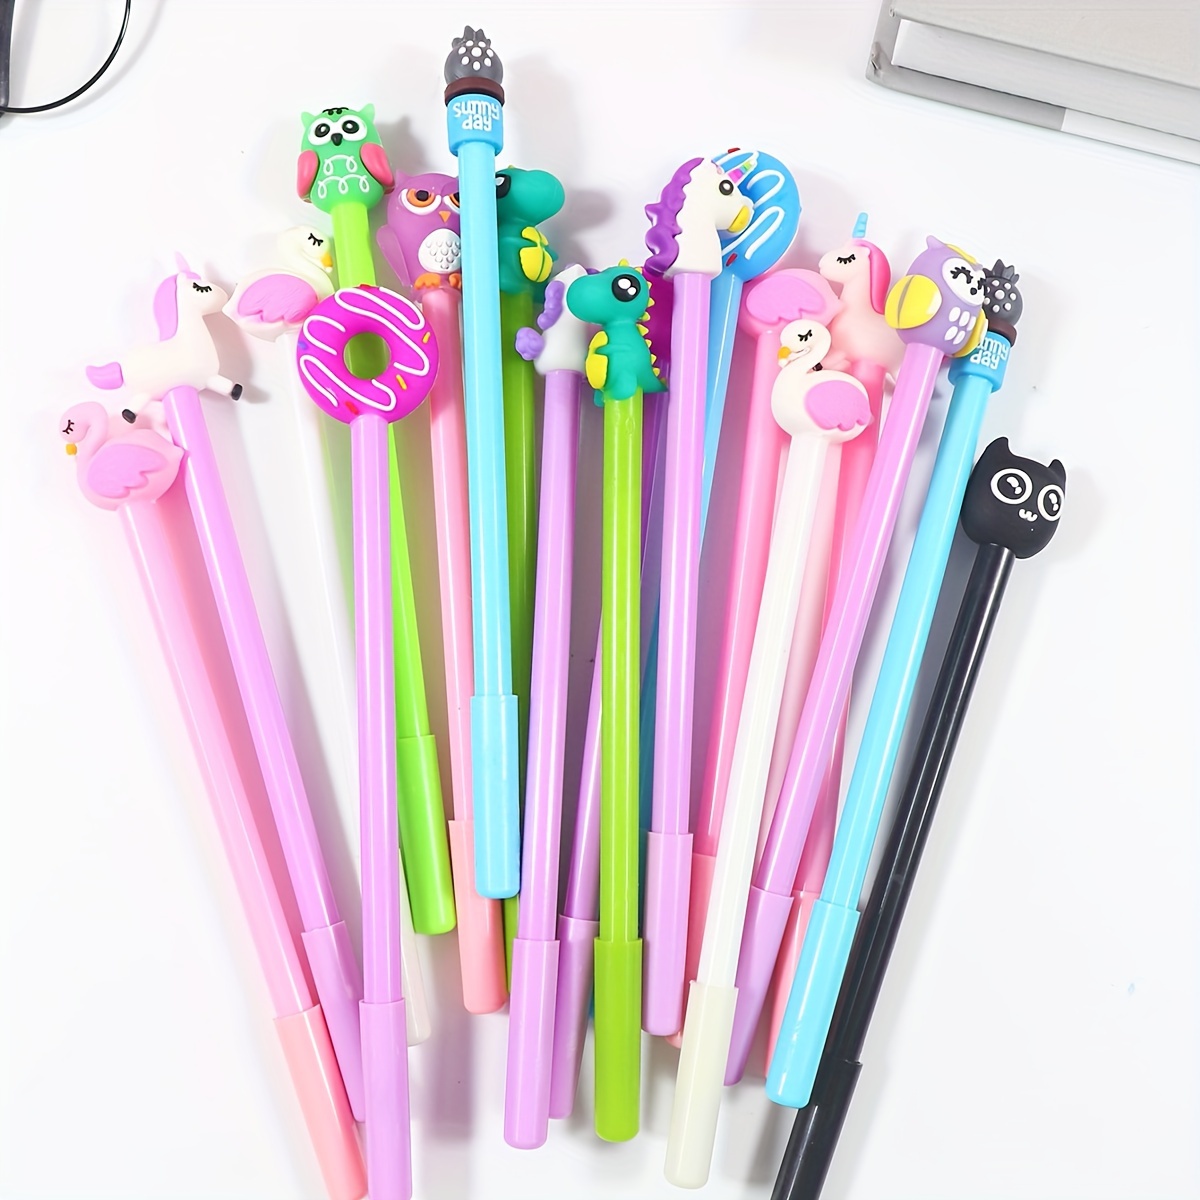 

20-pack Cartoon Ballpoint Pens With Extra Fine Point, Plastic Round Body, Click-off Cap, Blue Ink - Fun Writing Pens For School Prizes And Birthday Gifts (random Colors And Styles)